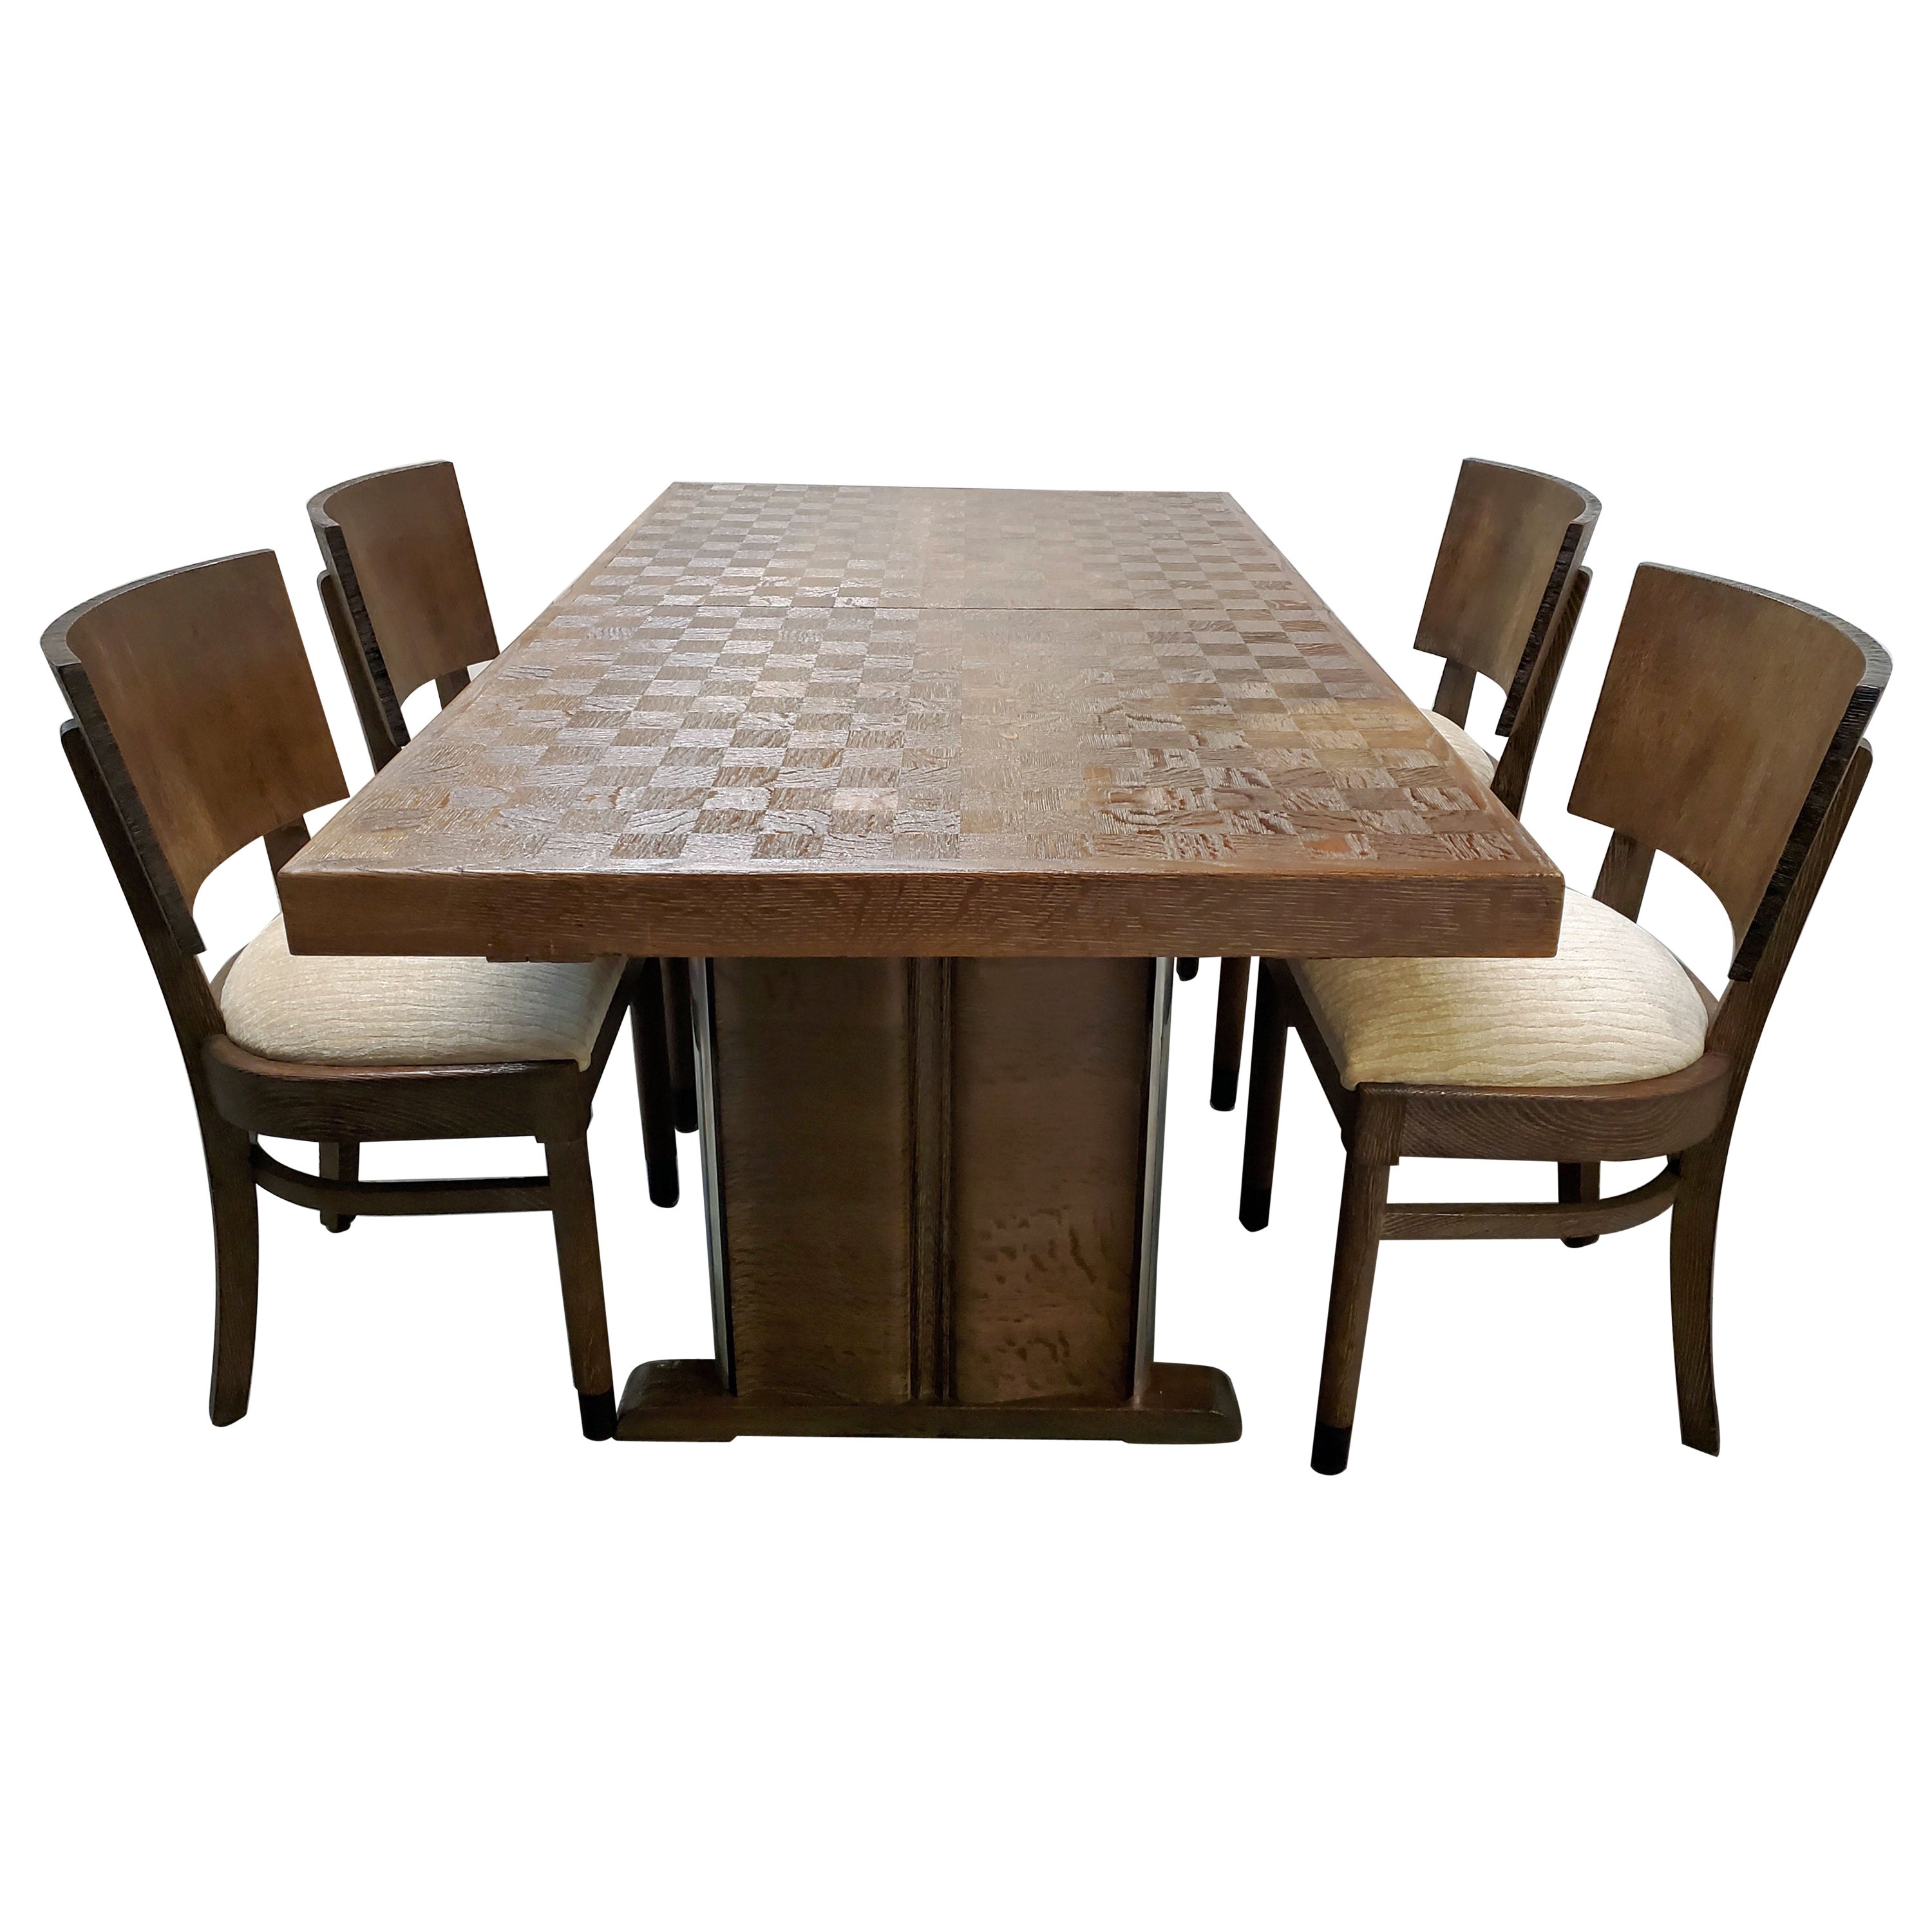 Belgian Midcentury Expandable Dining Table + 4 Chairs M. L. Baugniet For Sale